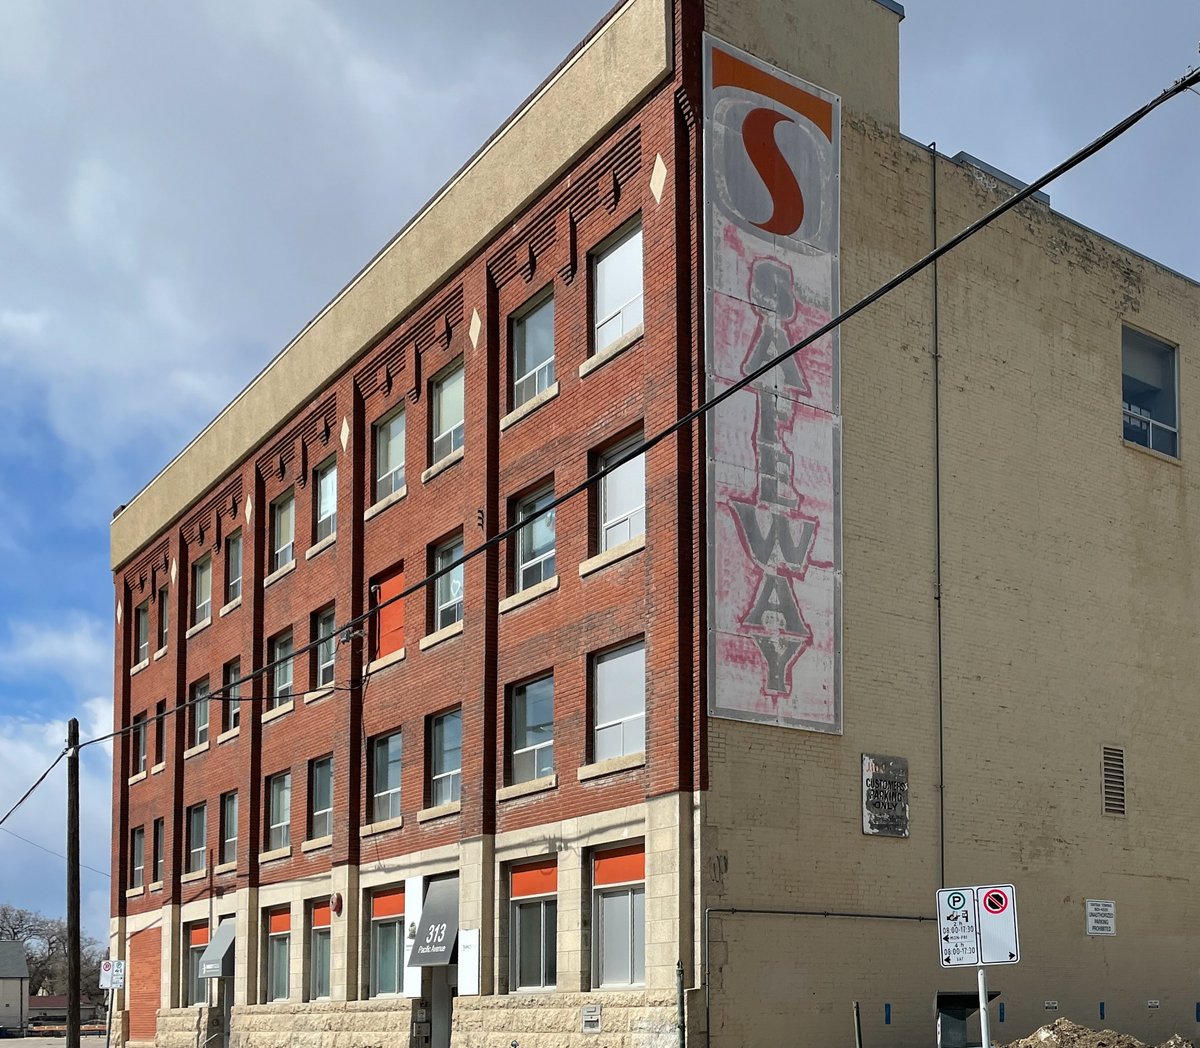 For many decades Canada Safeway was headquartered in Winnipeg’s Exchange District. The ghost sign can still be seen on the building today. 11/14